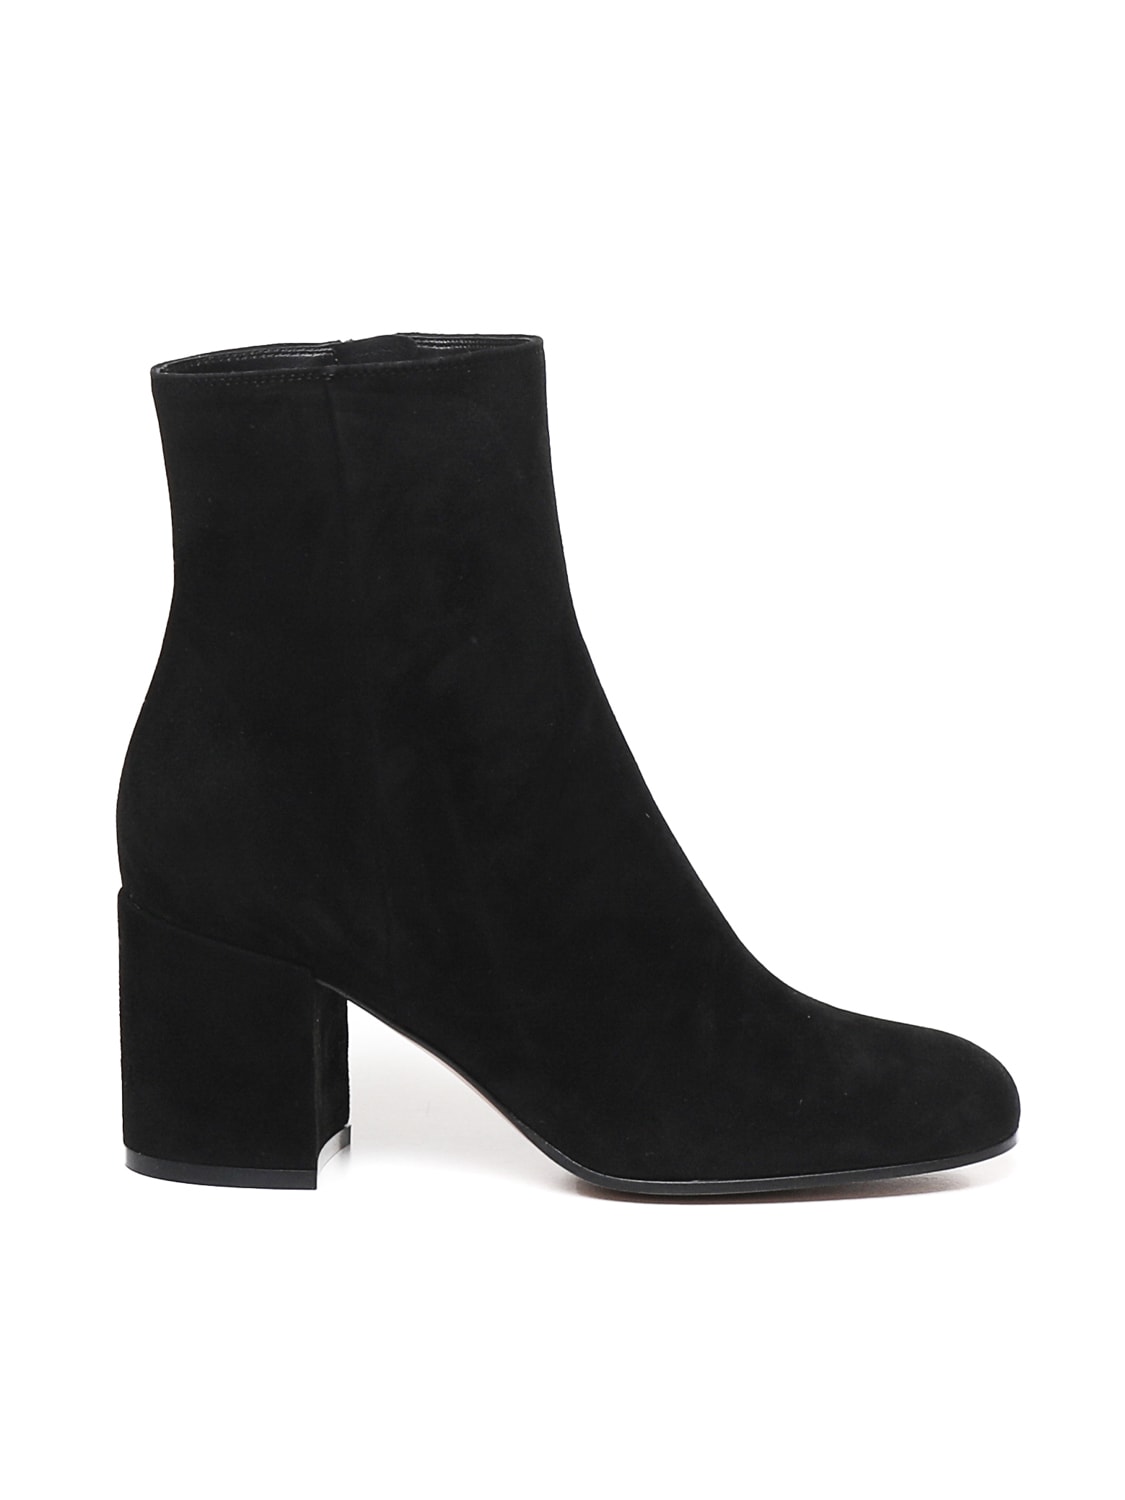 Joelle Suede Boots